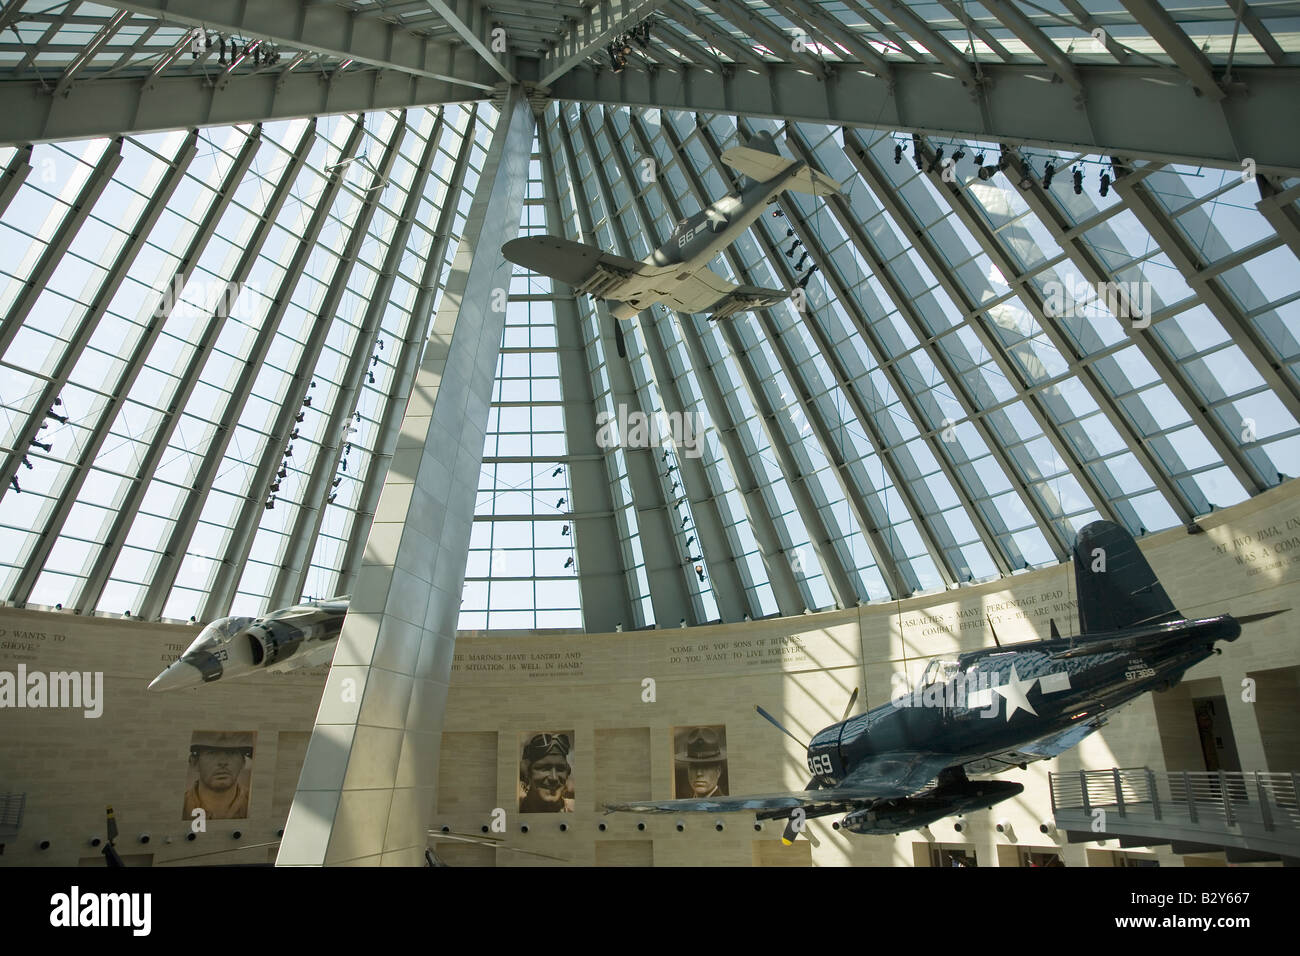 Interior view of military planes at the National Museum of the Marine Corps Stock Photo